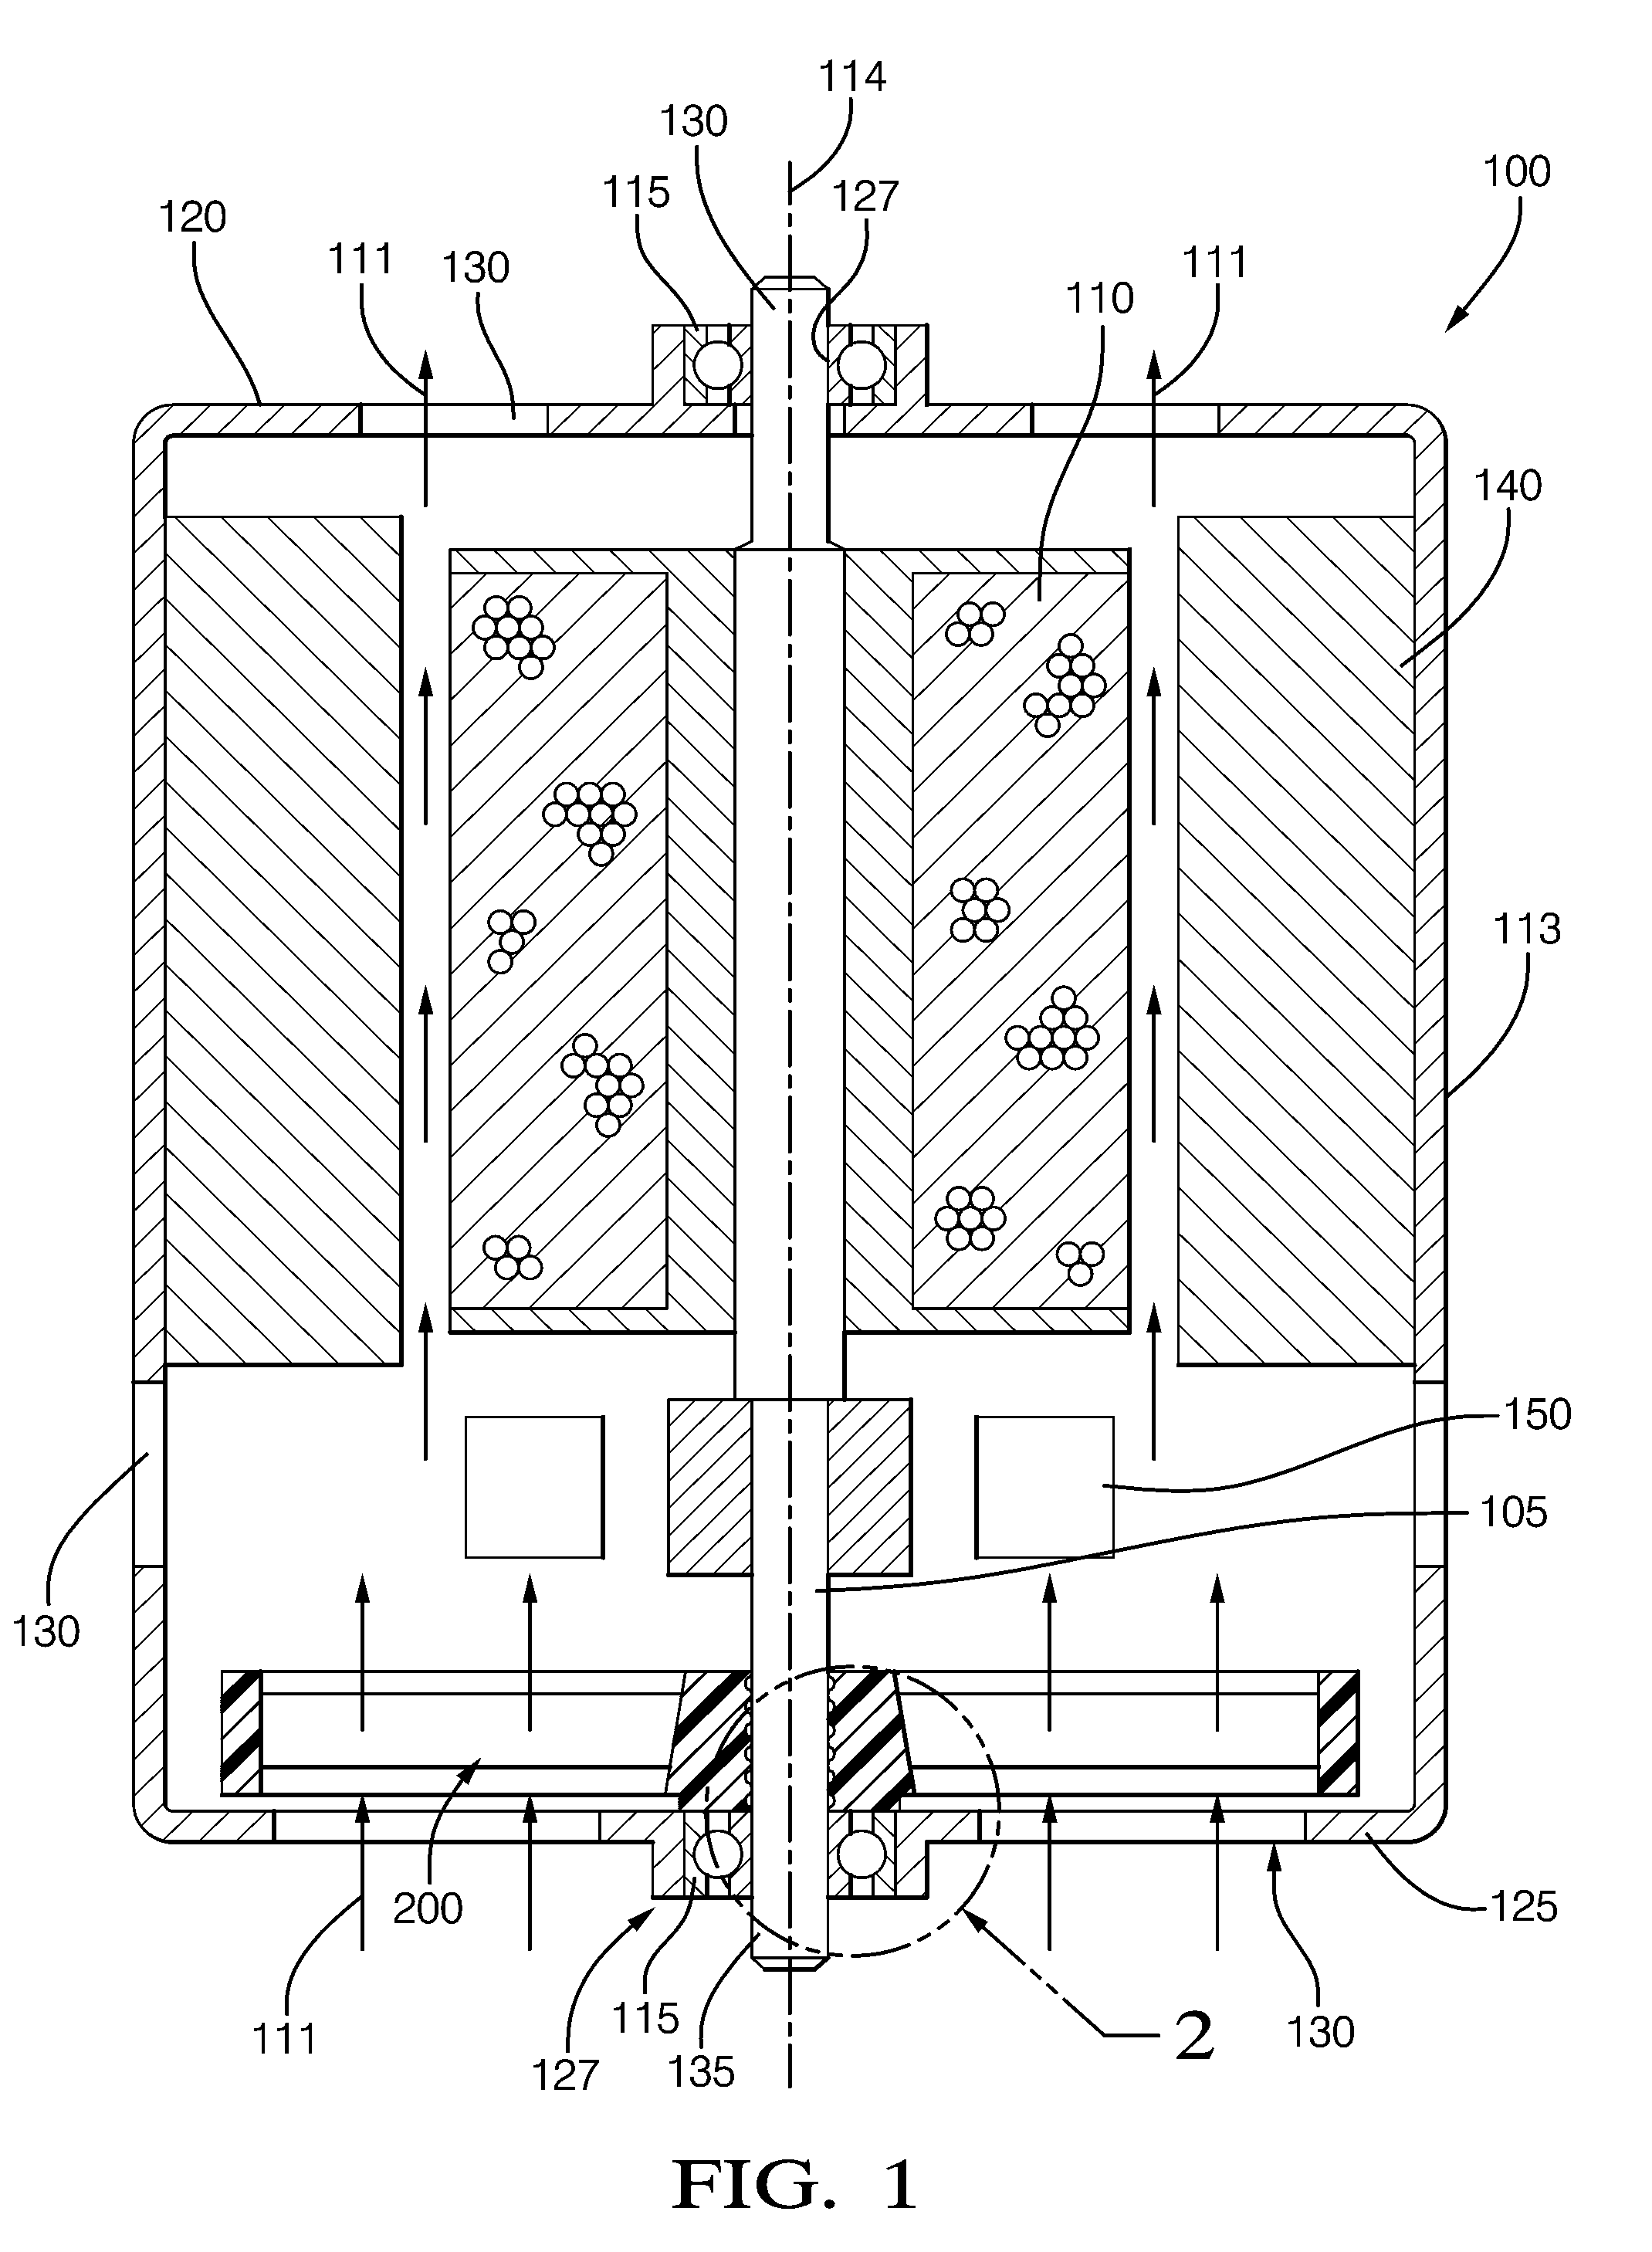 Oil retainer cooling assembly for an electric motor